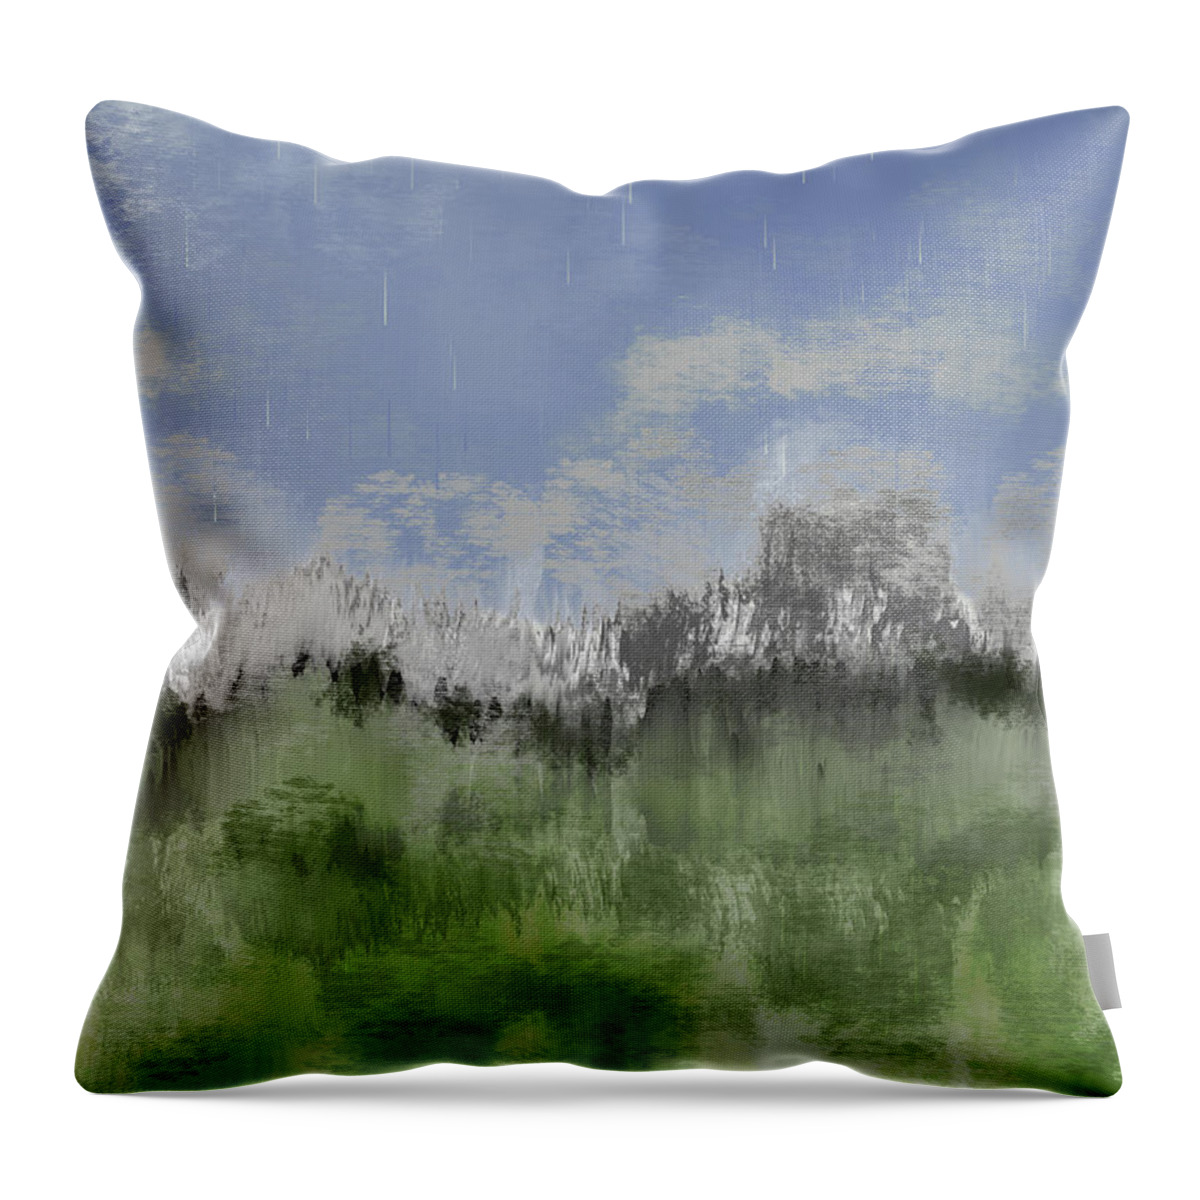 Central Park Throw Pillow featuring the digital art It's Raining in Central Park by Alison Frank